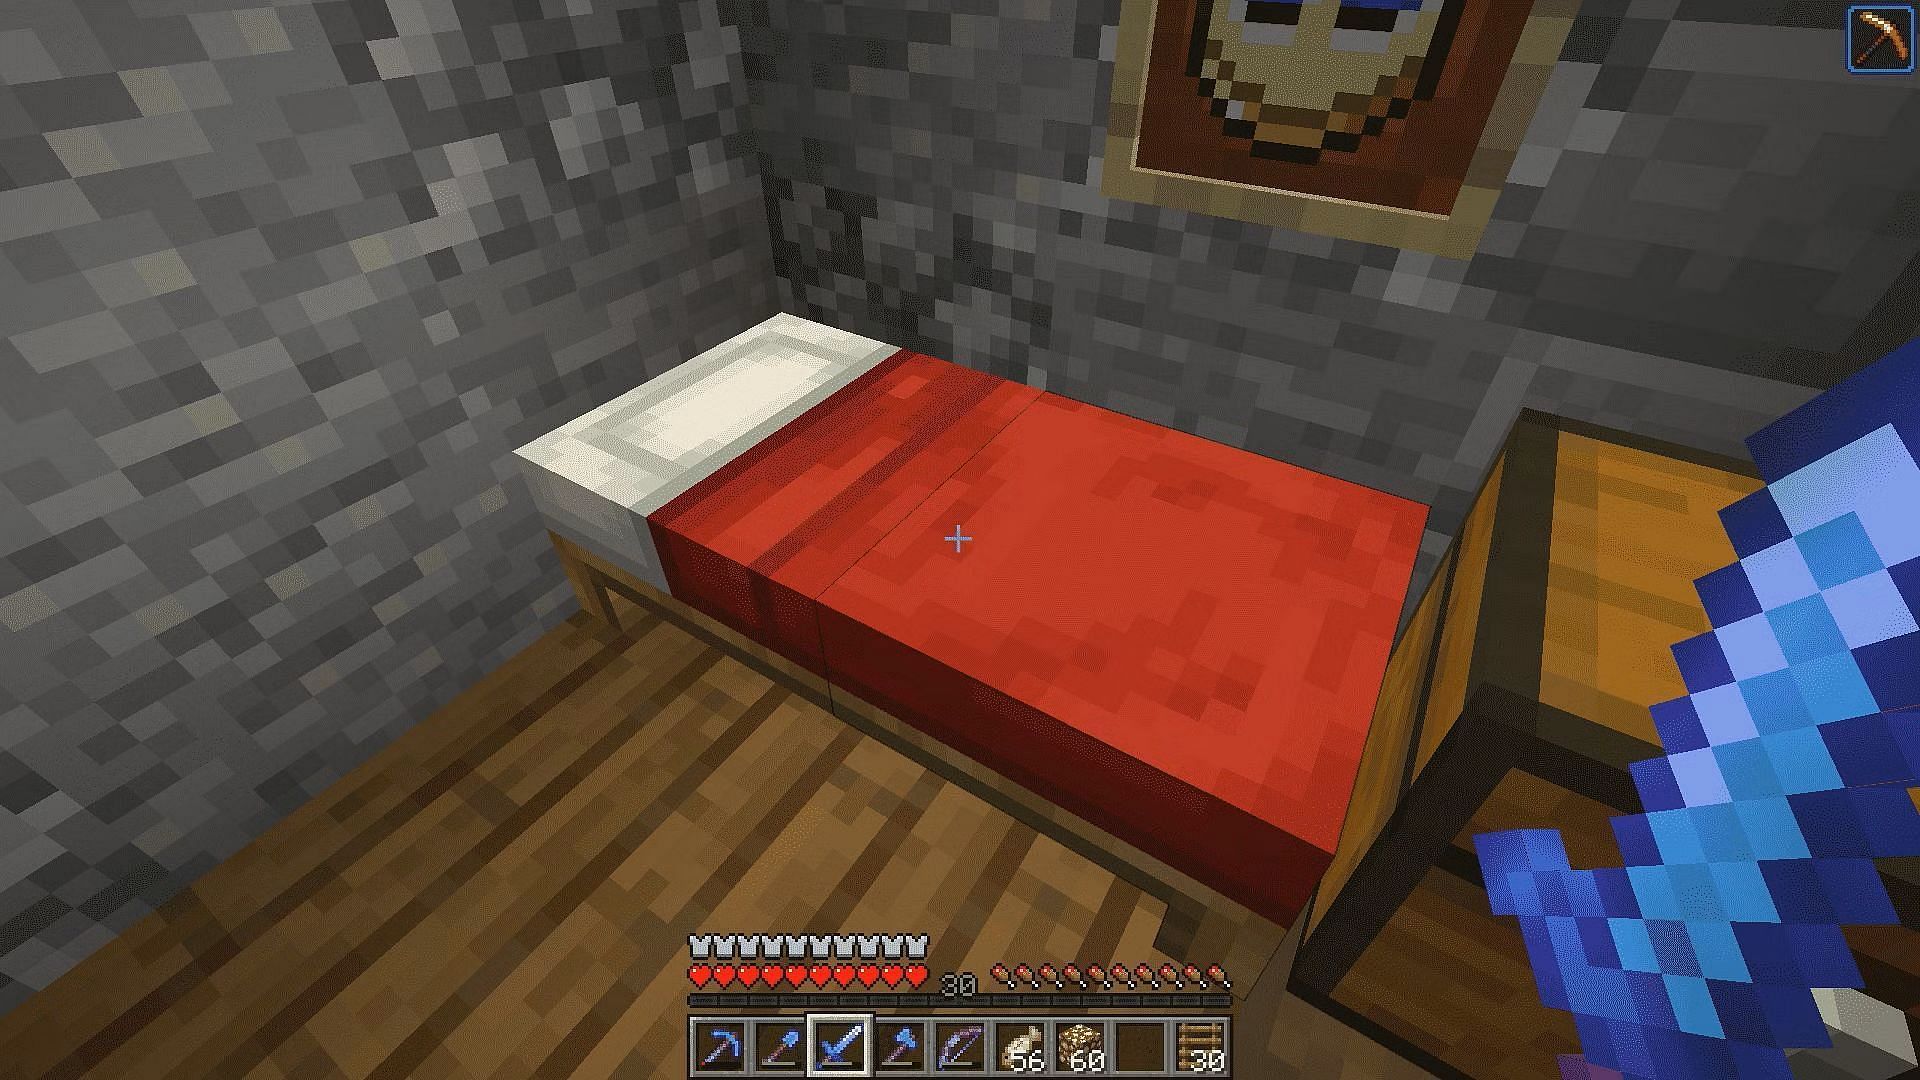 Beds can explode if you try to interact with them in Nether and End dimensions in Minecraft (Image via Mojang)